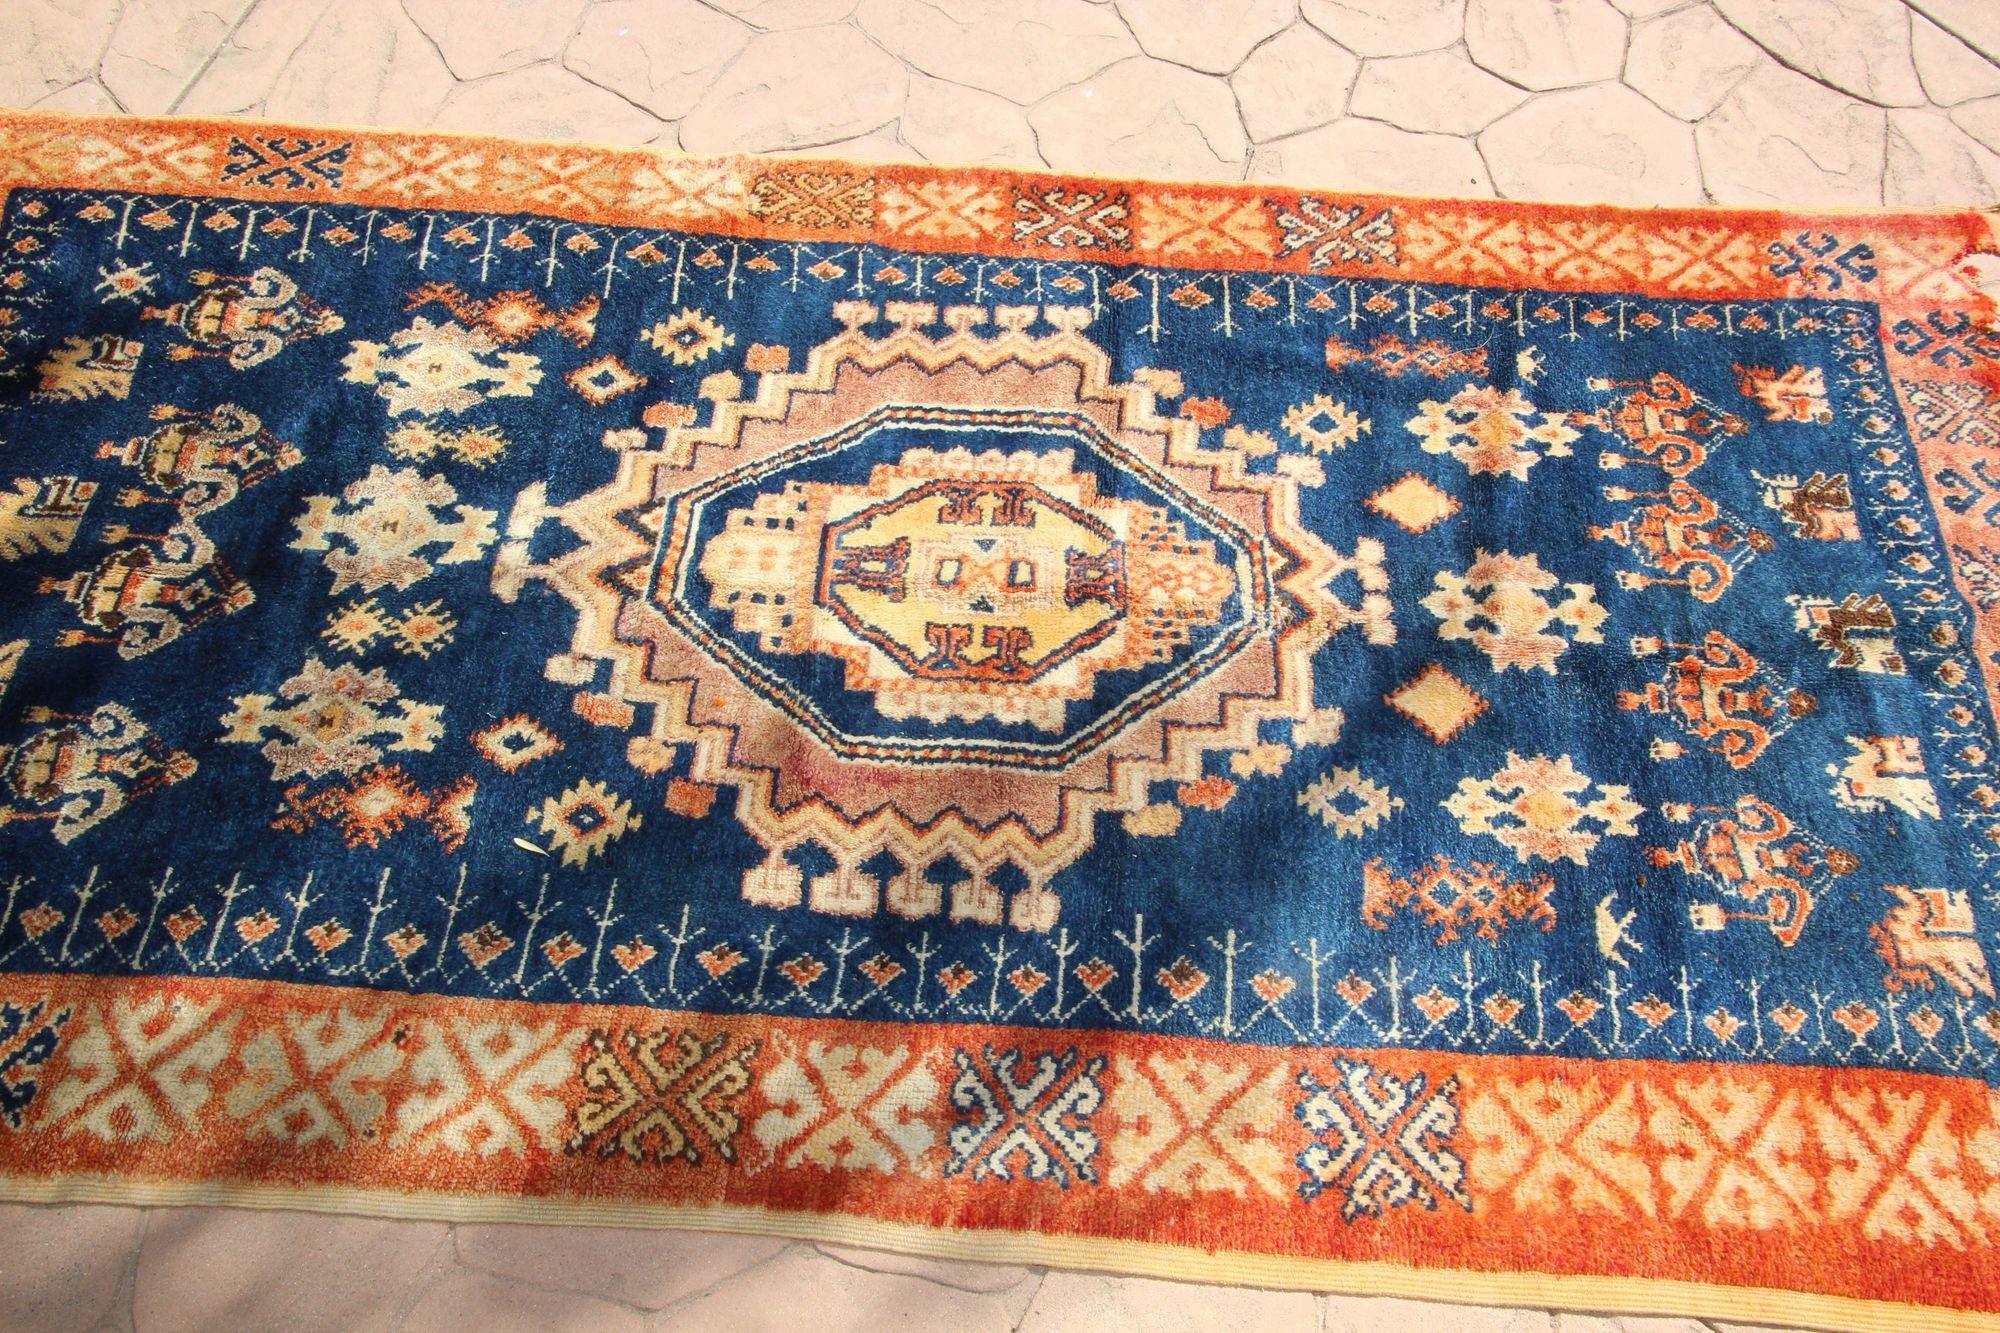 1960s Vintage Moroccan Tribal African Rug Indigo and Burnt Orange In Fair Condition For Sale In North Hollywood, CA